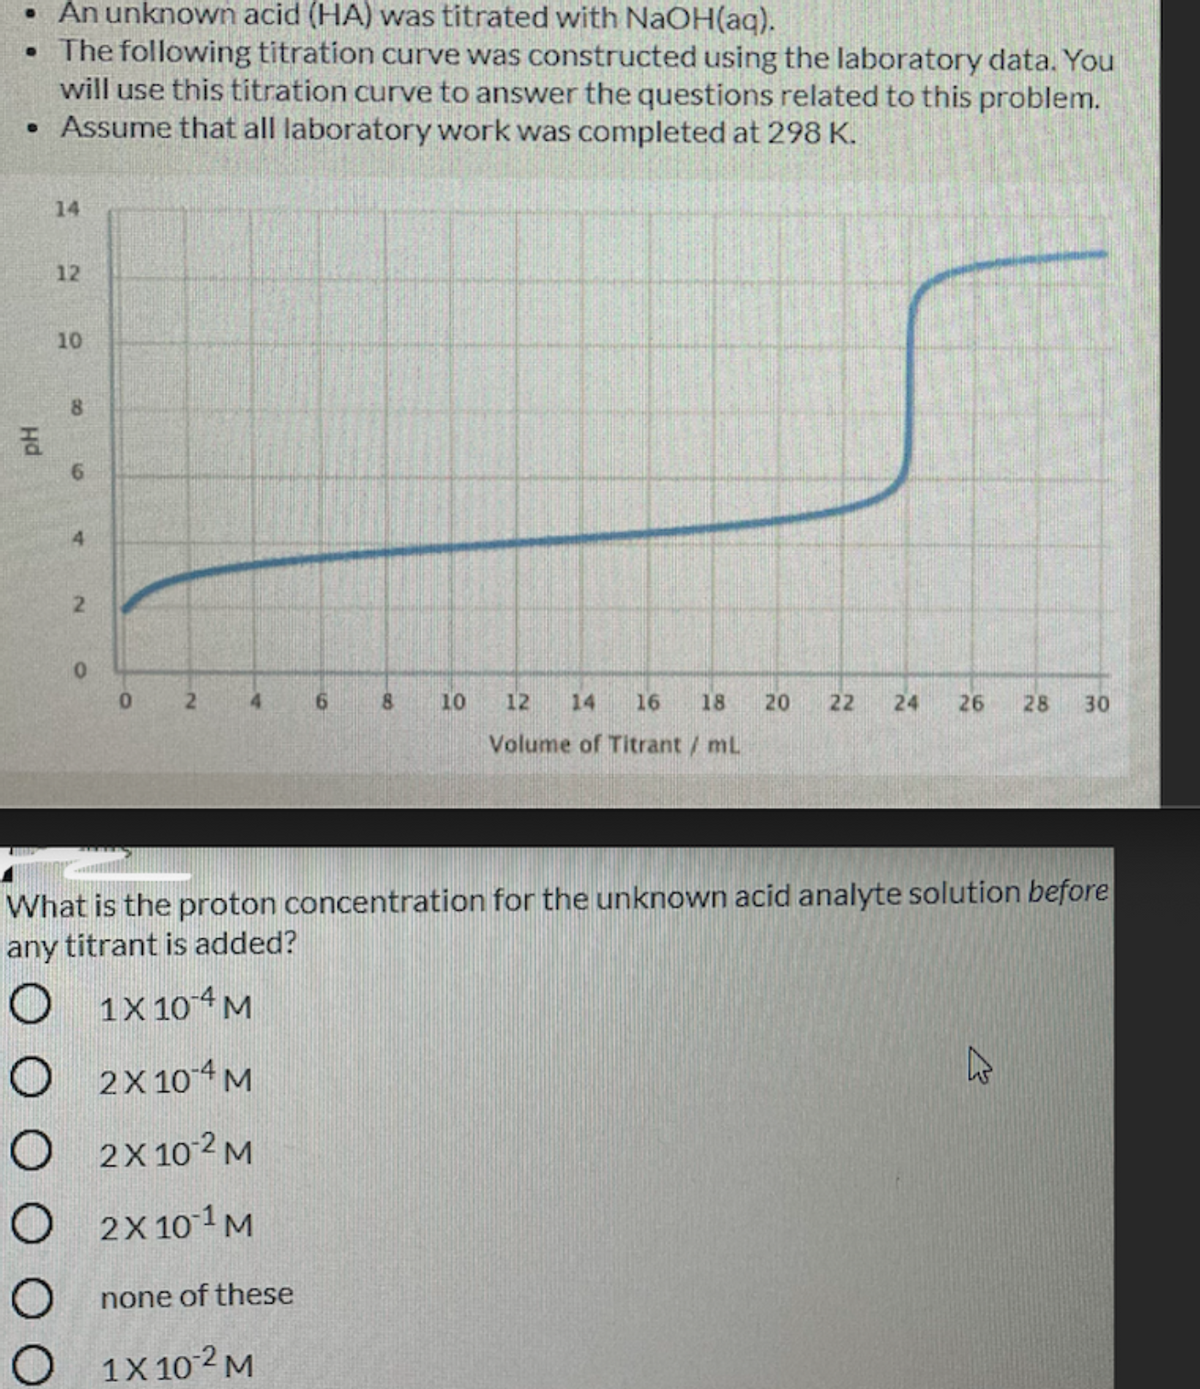 • An unknown acid (HA) was titrated with NAOH(aq).
•The following titration curve was constructed using the laboratory data. You
will use this titration curve to answer the questions related to this problem.
• Assume that all laboratory work was completed at 298 K.
14
12
10
6.
4.
2.
9.
8.
10
12
14
16
18
20
22
26
28
30
Volume of Titrant / mL
What is the proton concentration for the unknown acid analyte solution before
any titrant is added?
O 1x 104M
O 2x 104M
2X 10 2 M
O 2X 101M
none of these
1X 10-2 M
8.
24
8.
